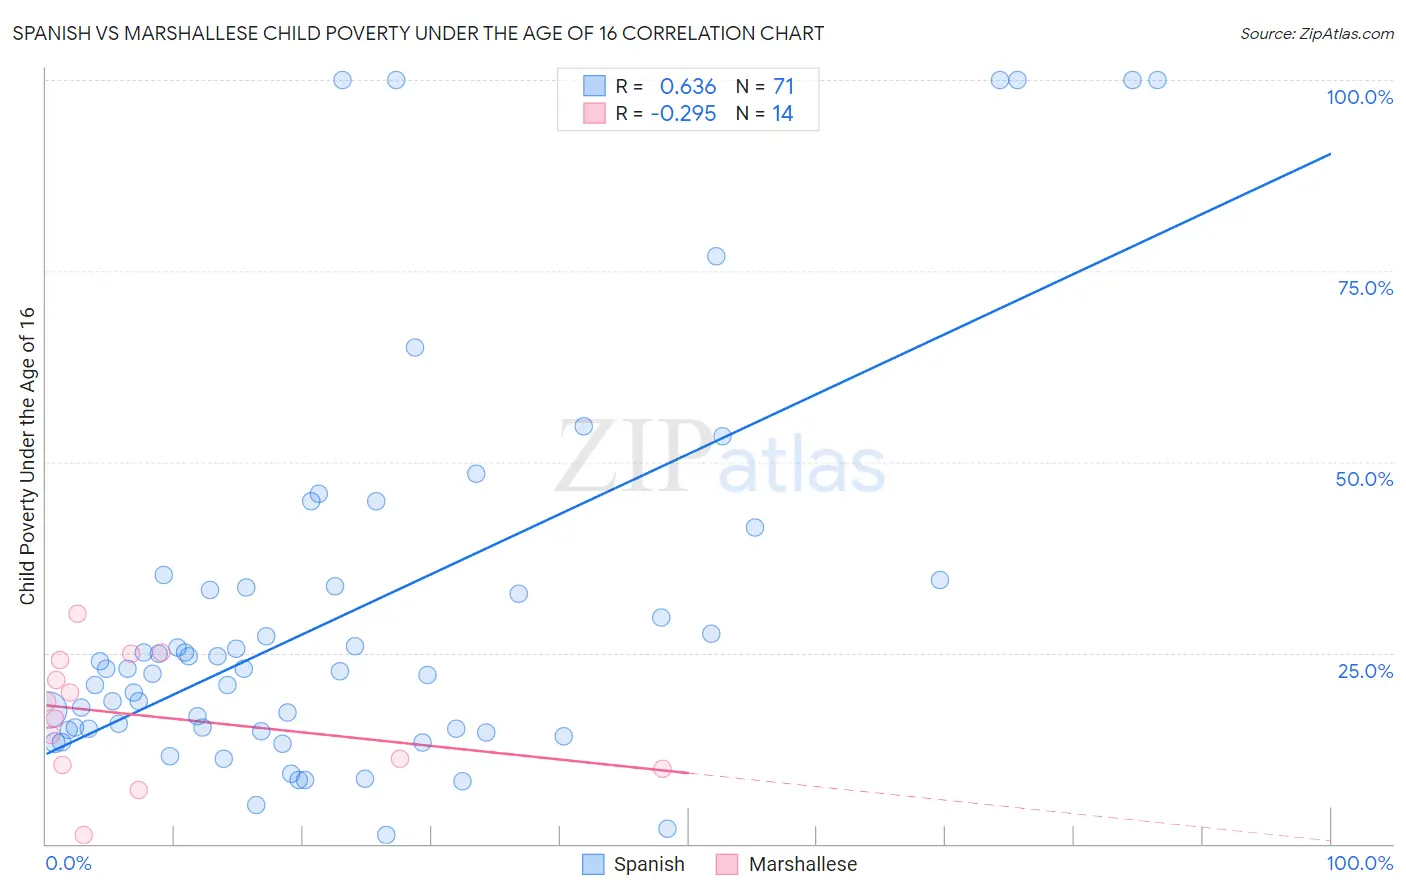 Spanish vs Marshallese Child Poverty Under the Age of 16